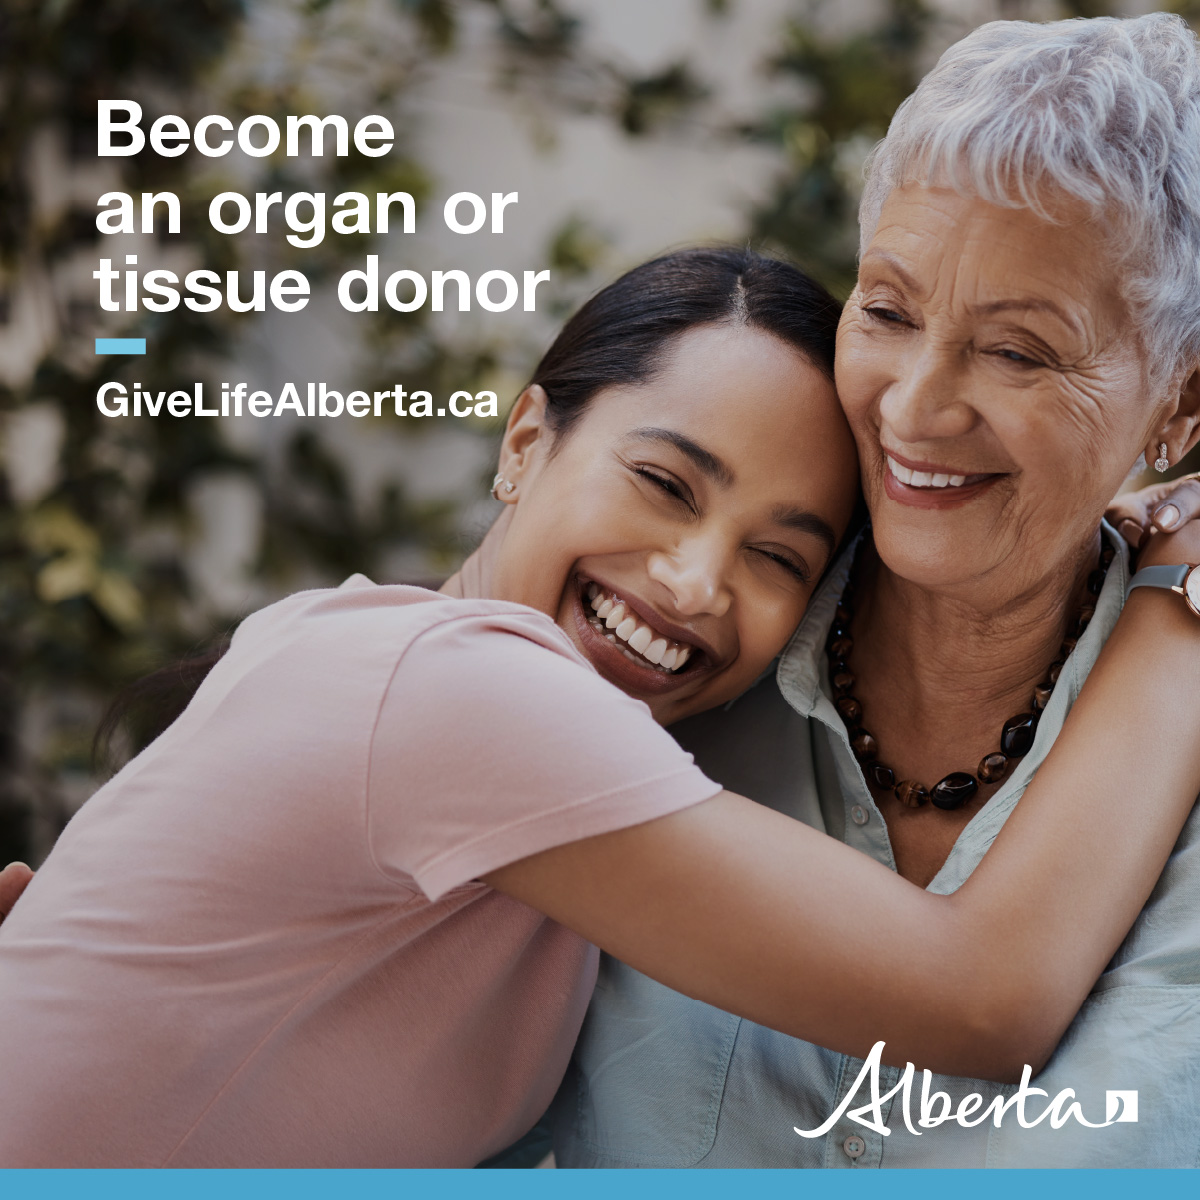 Did you know, everyone has the potential to be an organ and/or tissue donor, regardless of age or health? If you are 18+, register your consent: GiveLifeAlberta.ca